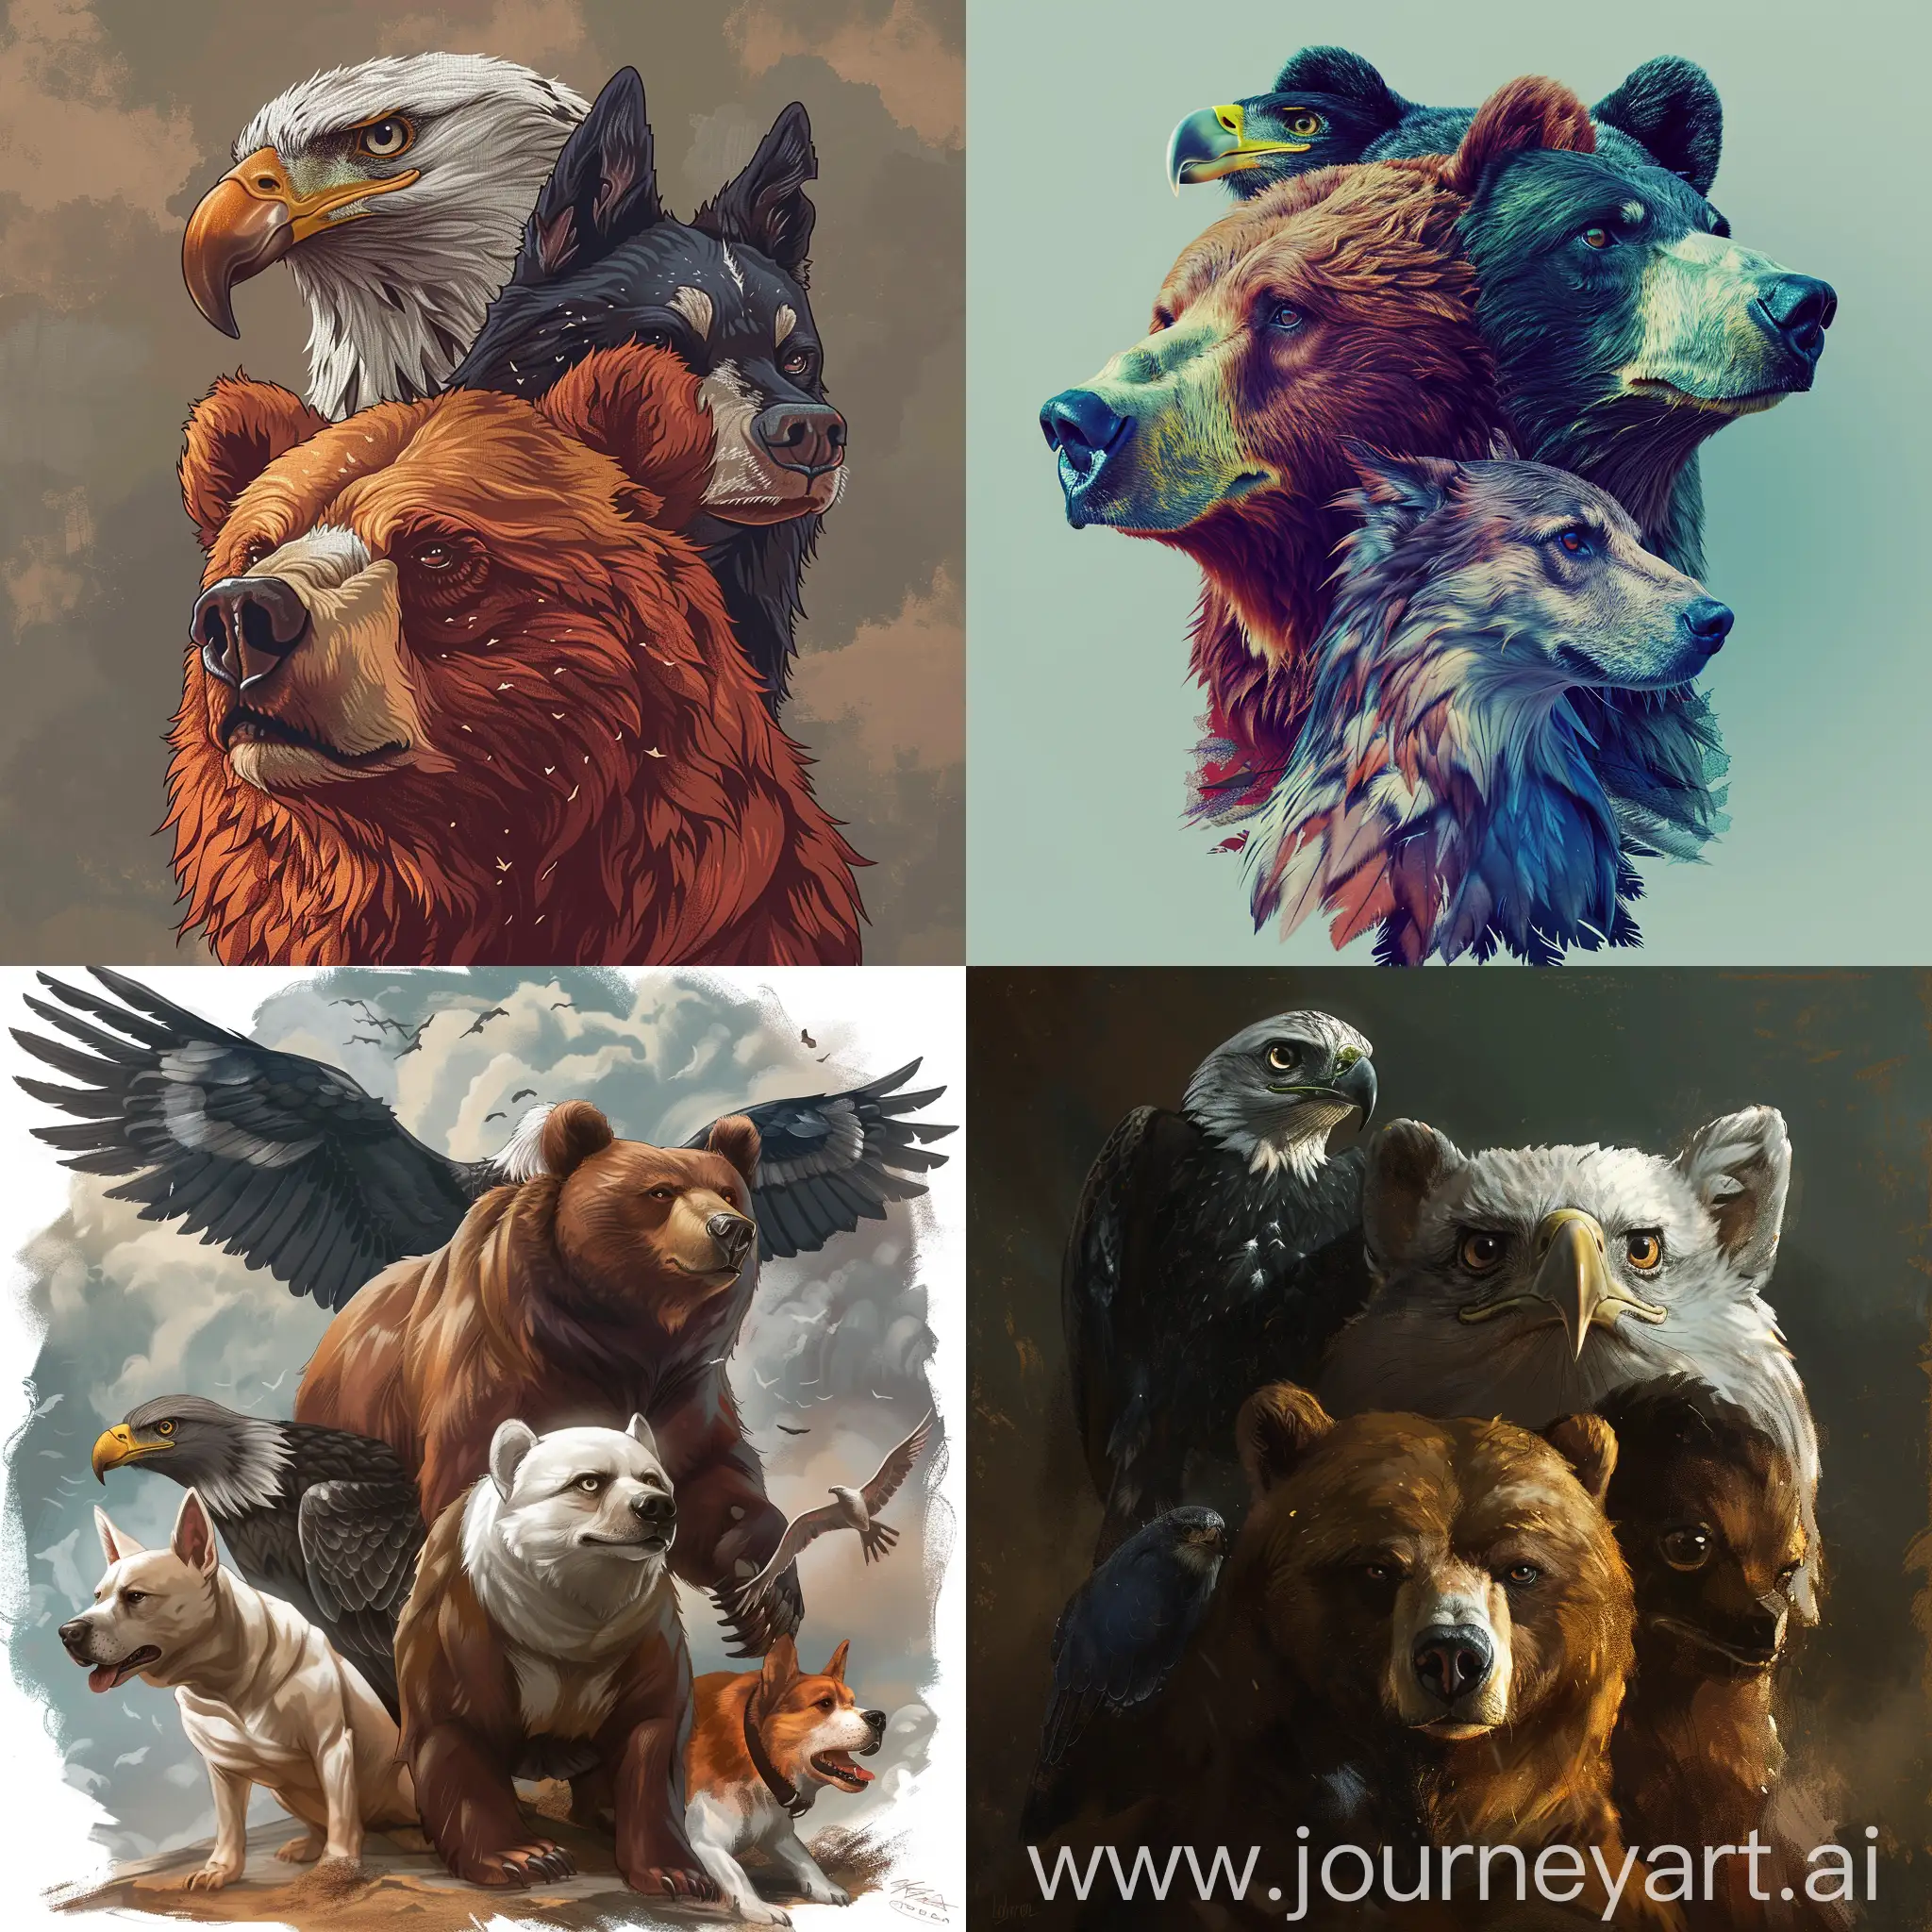 create an imagine with a bear, an eagle and a dog mixed together 